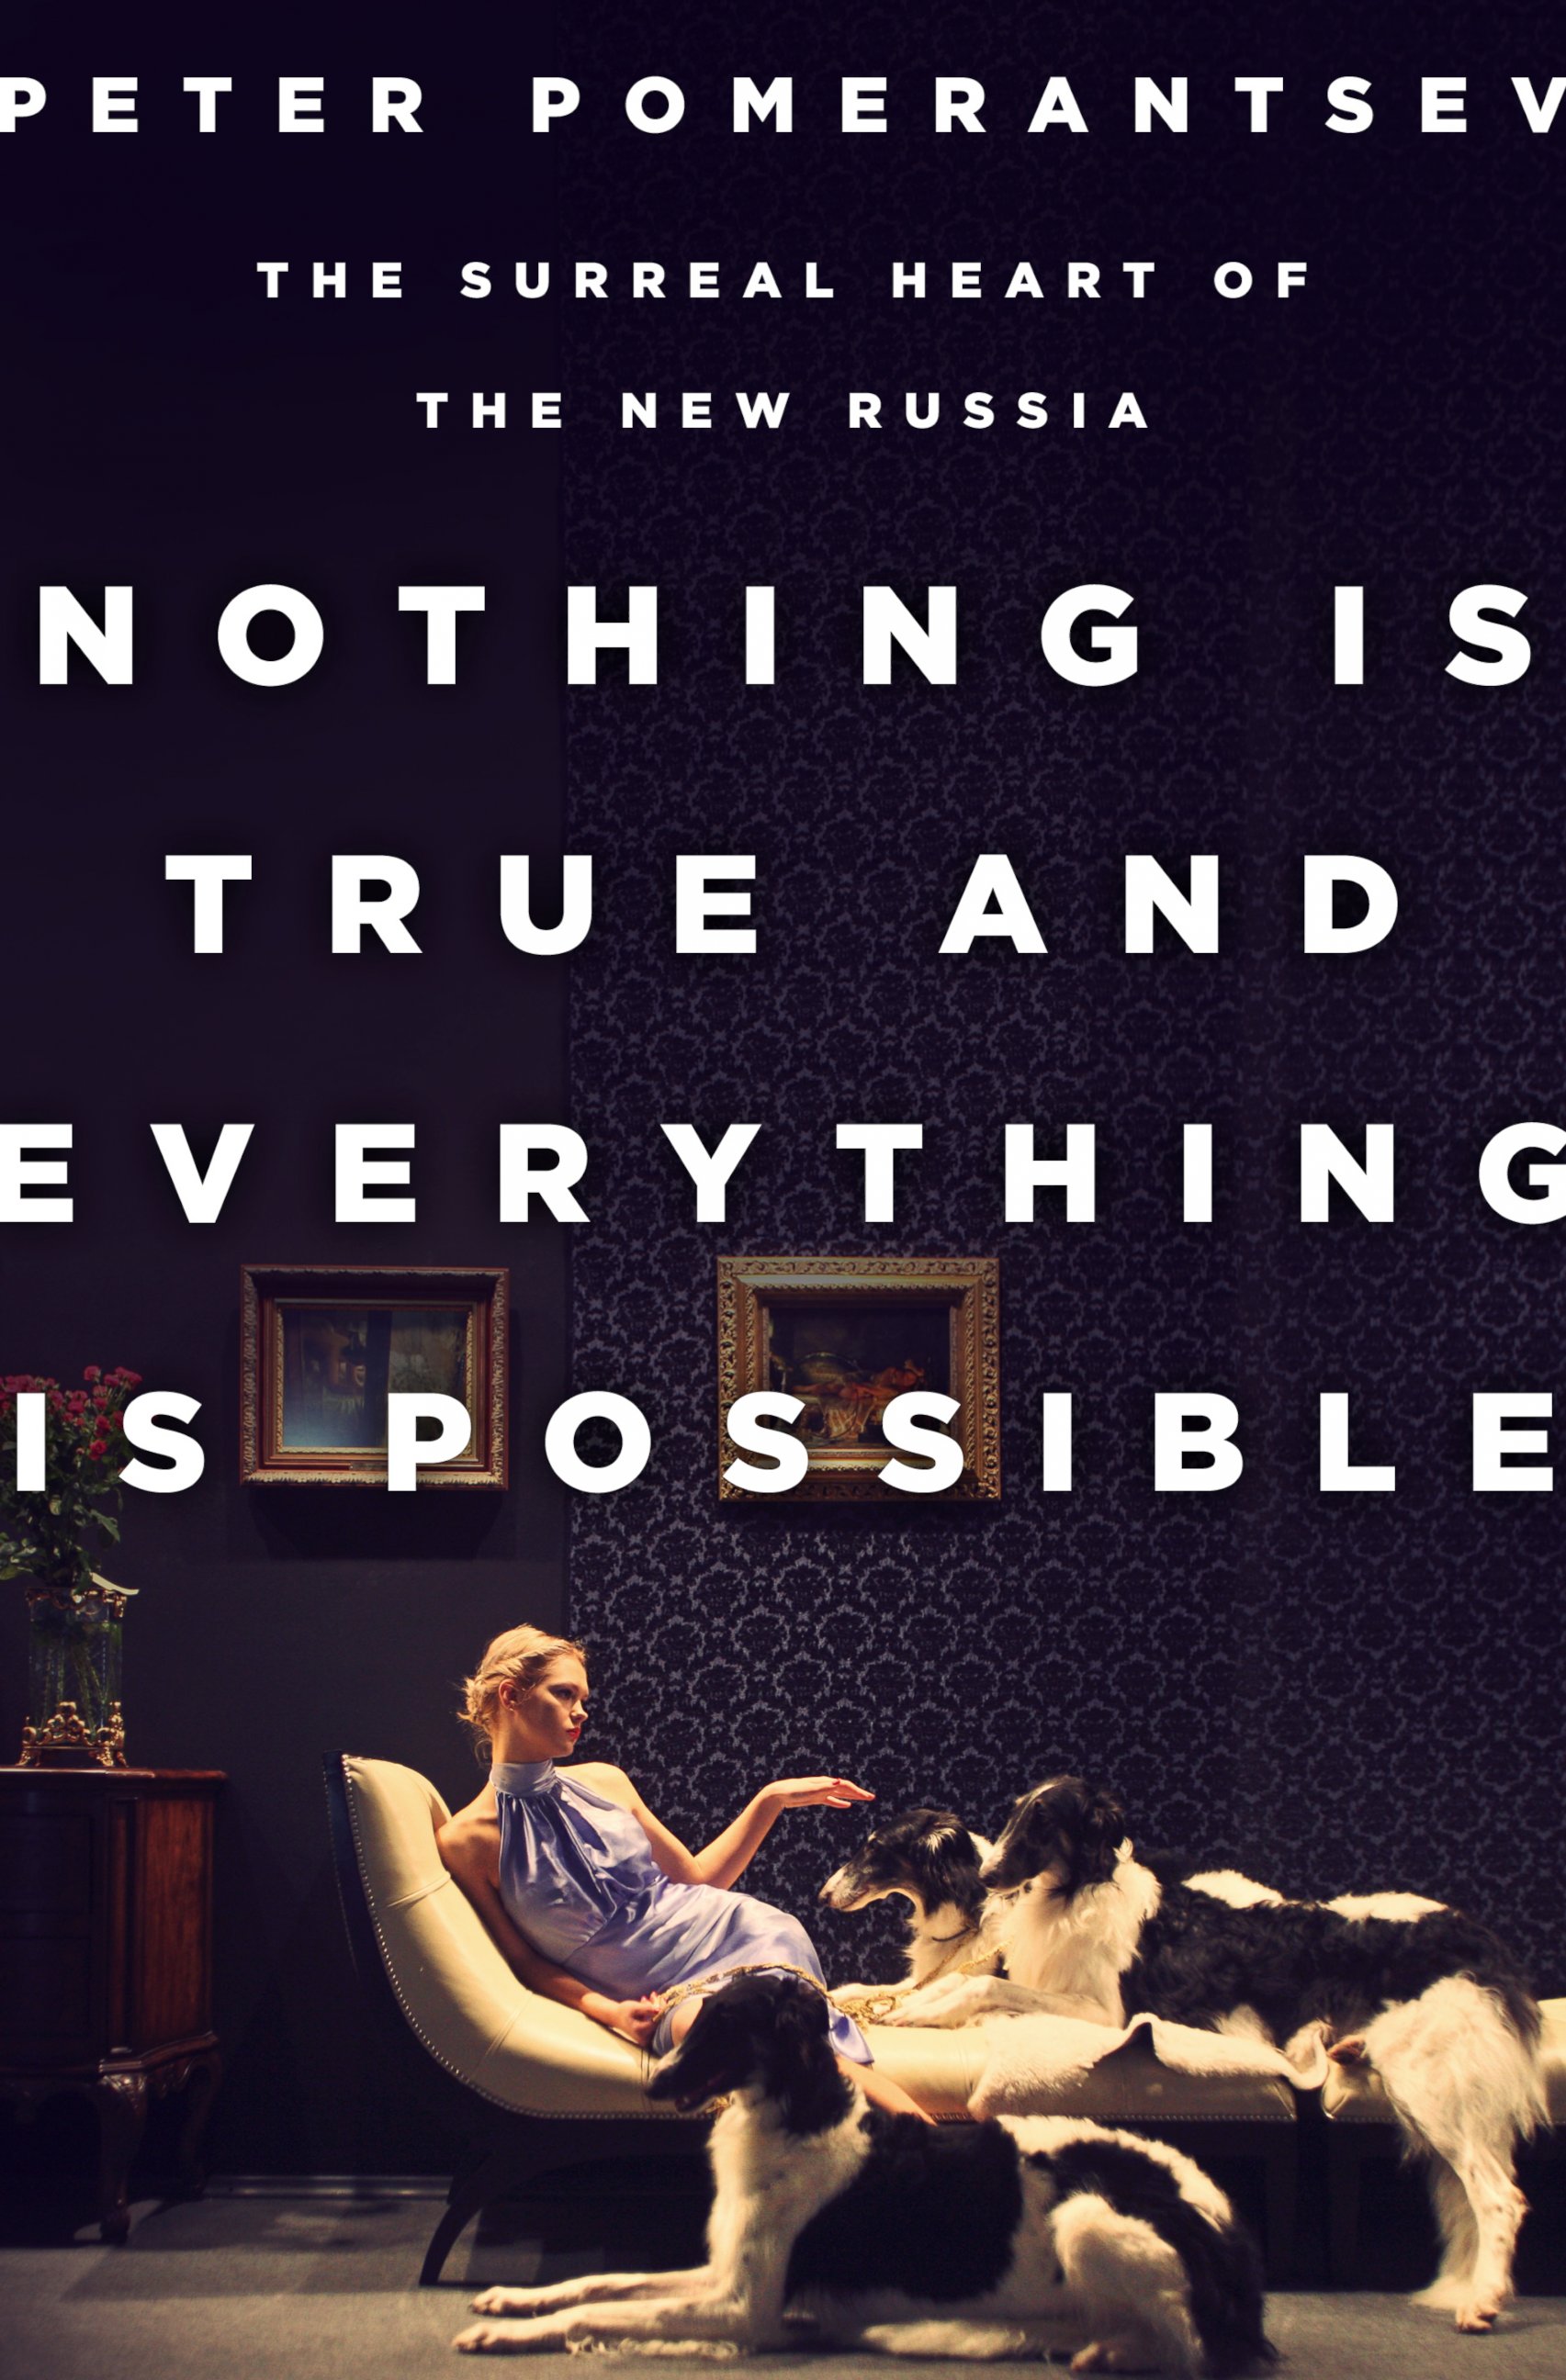 PHOTO: The cover of "Nothing is True and Everything is Possible" by Peter Pomerantsev.